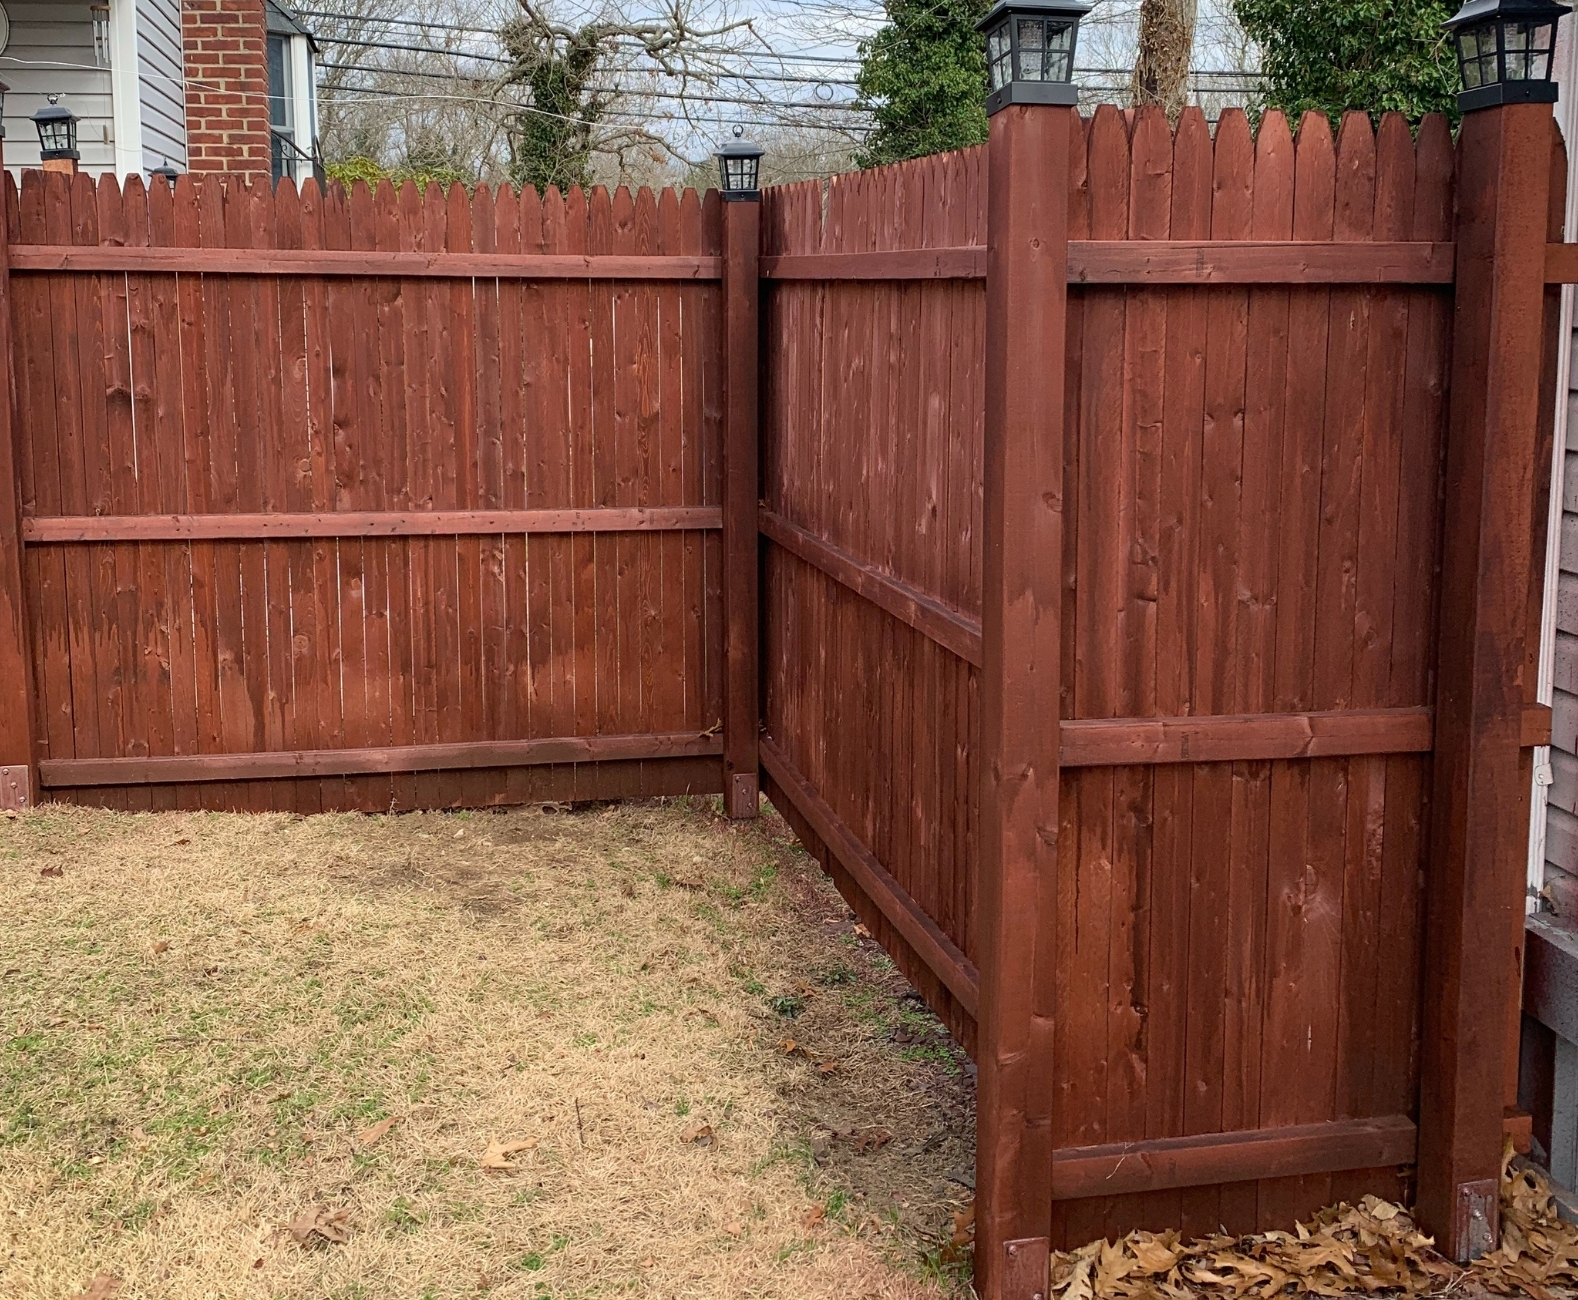 Michelle's Refinished Fence